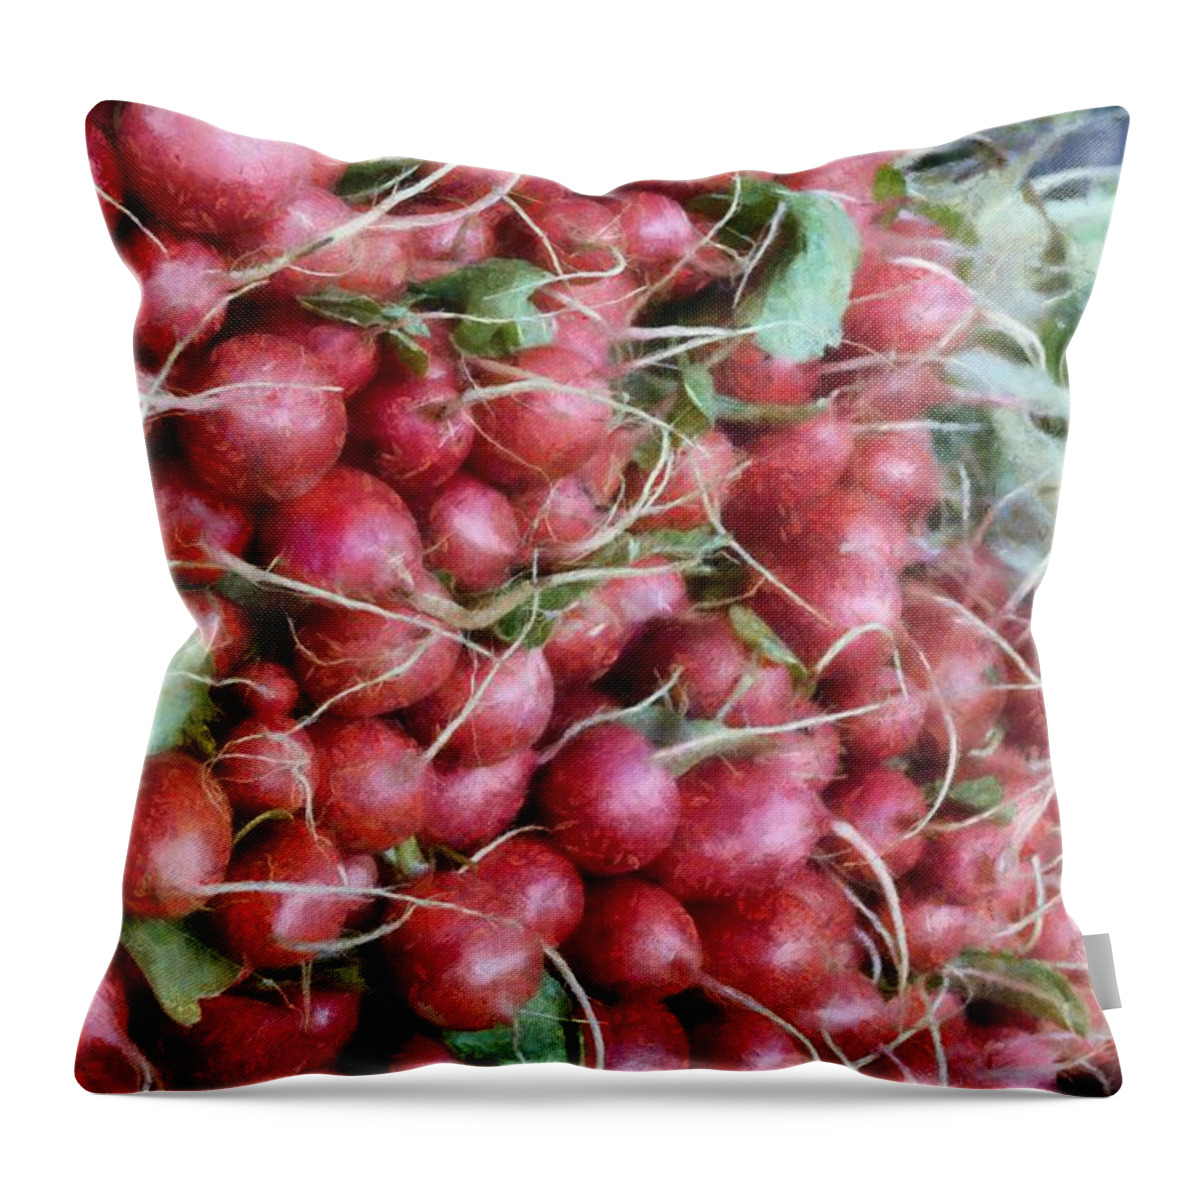 Radish Throw Pillow featuring the photograph Red White and Blue at the Market by Michelle Calkins